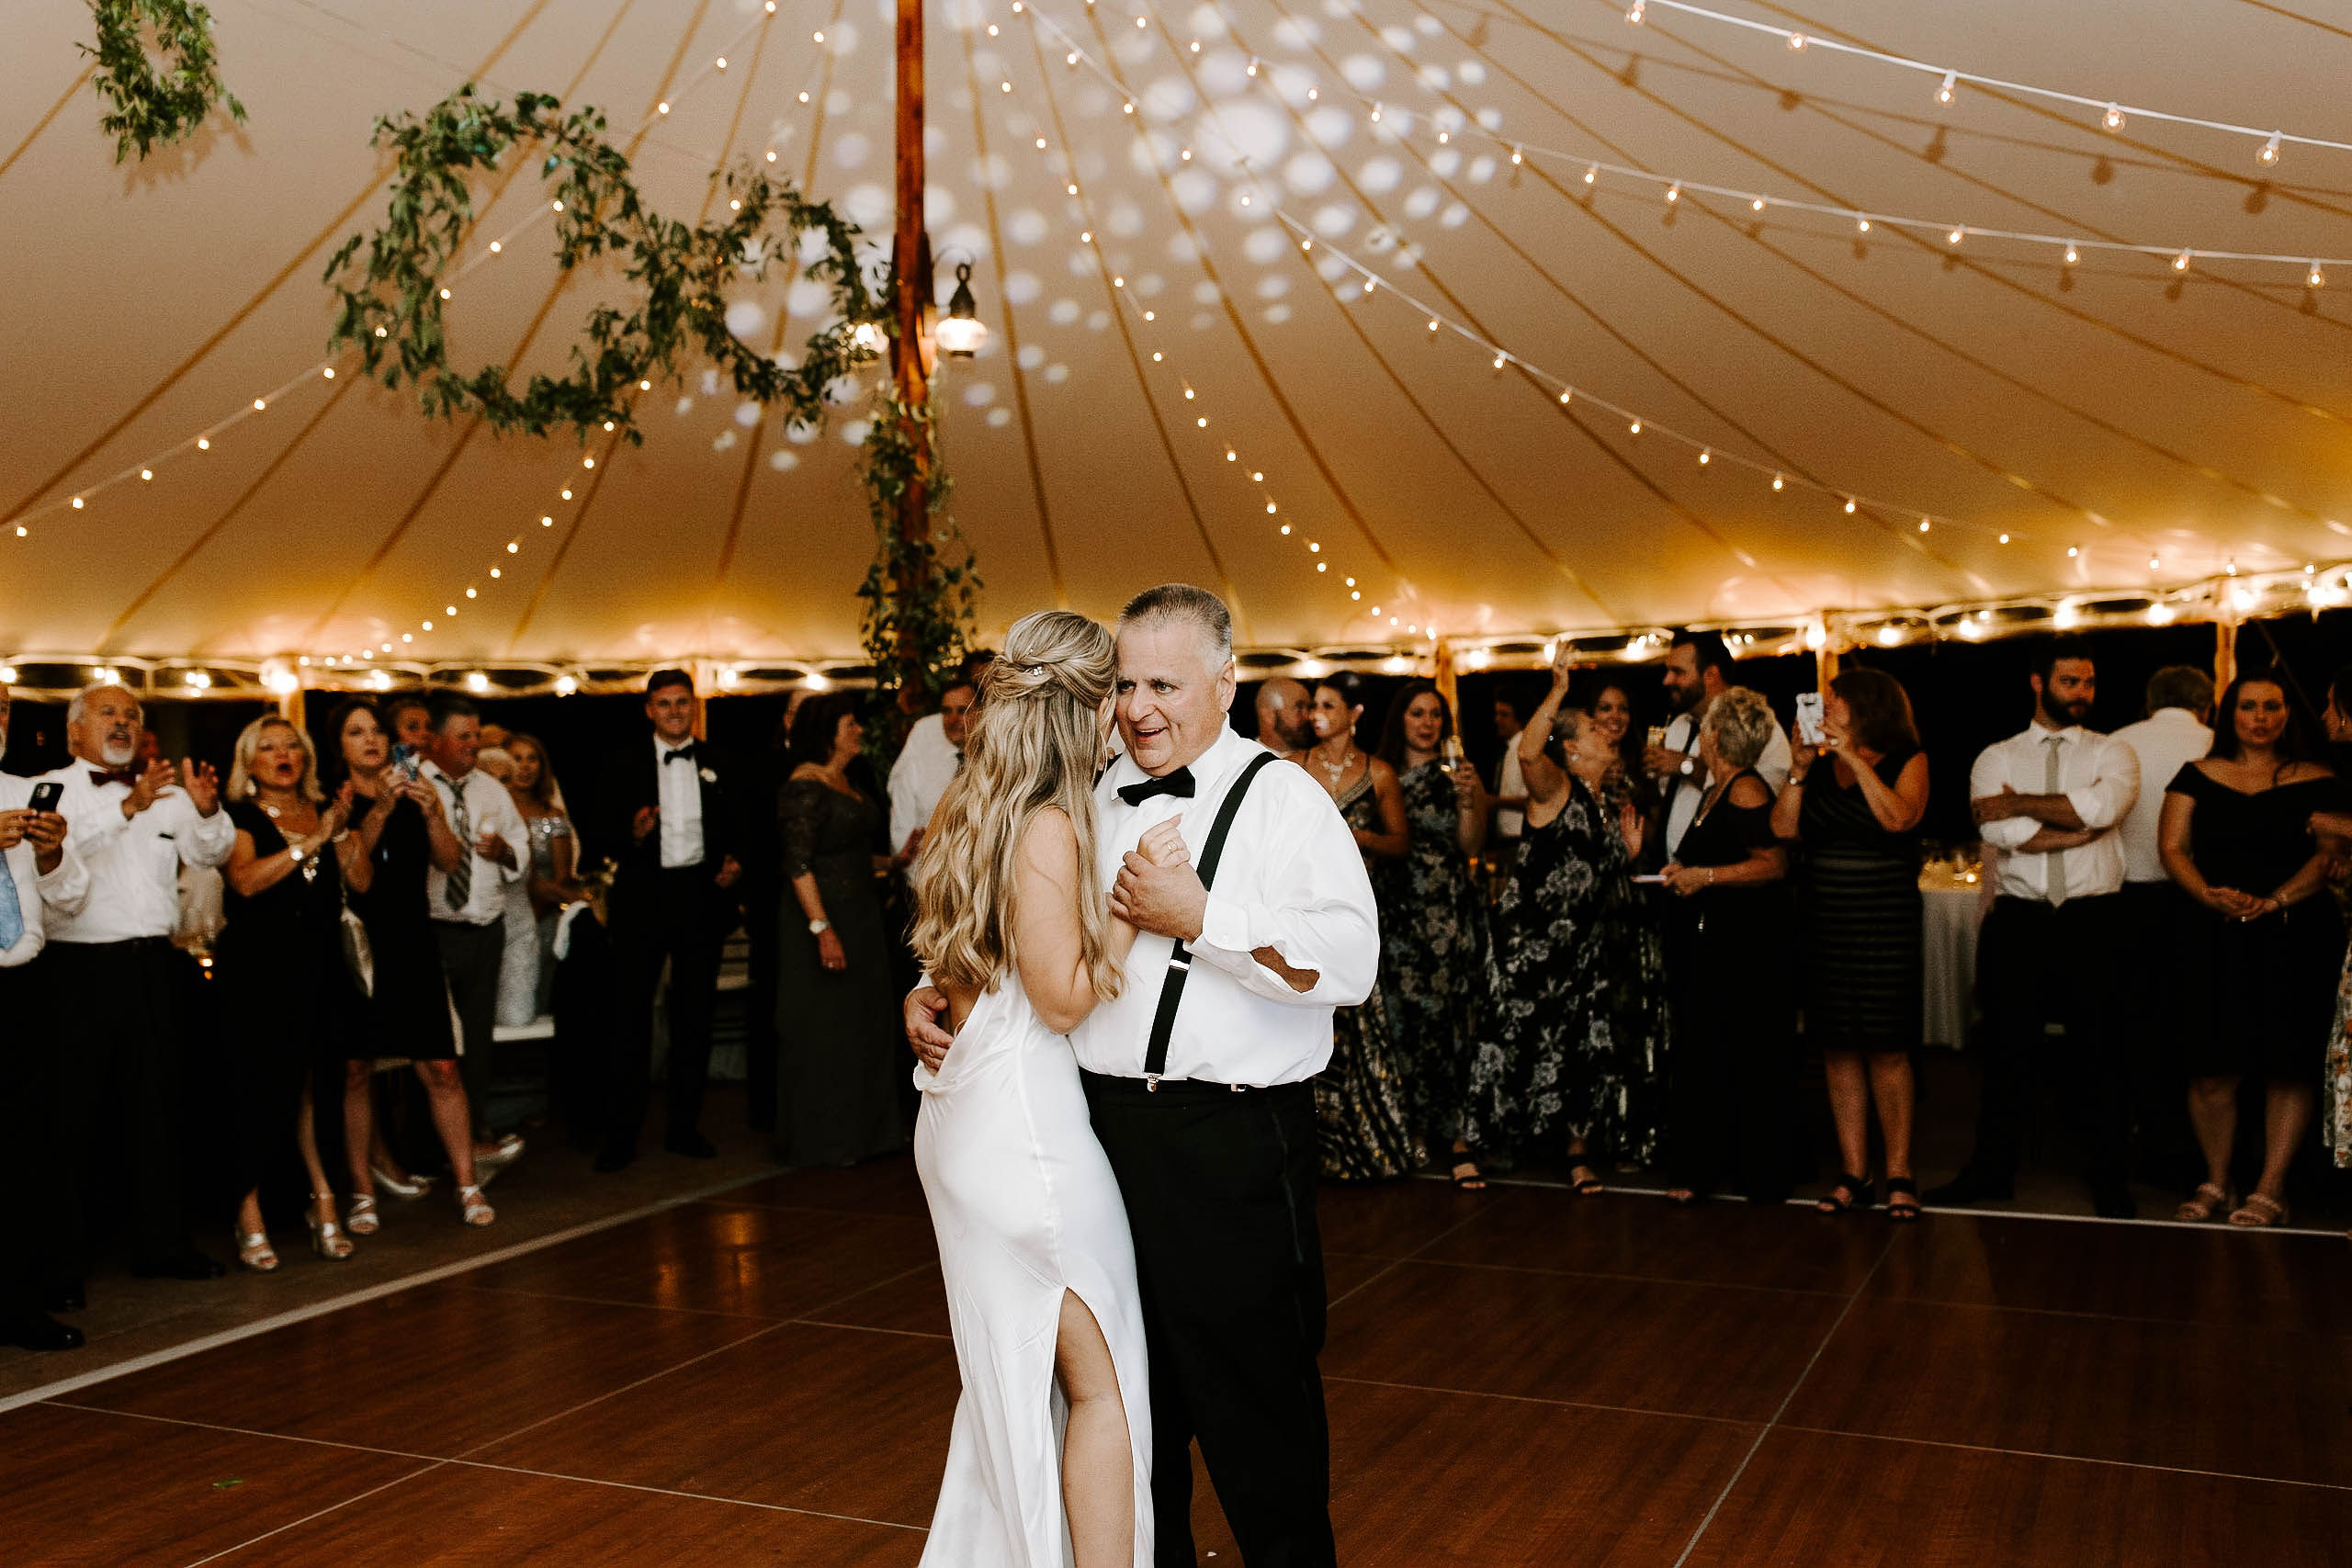 Sunning bride shares a dance with her dad on her dreamy Boston wedding day!